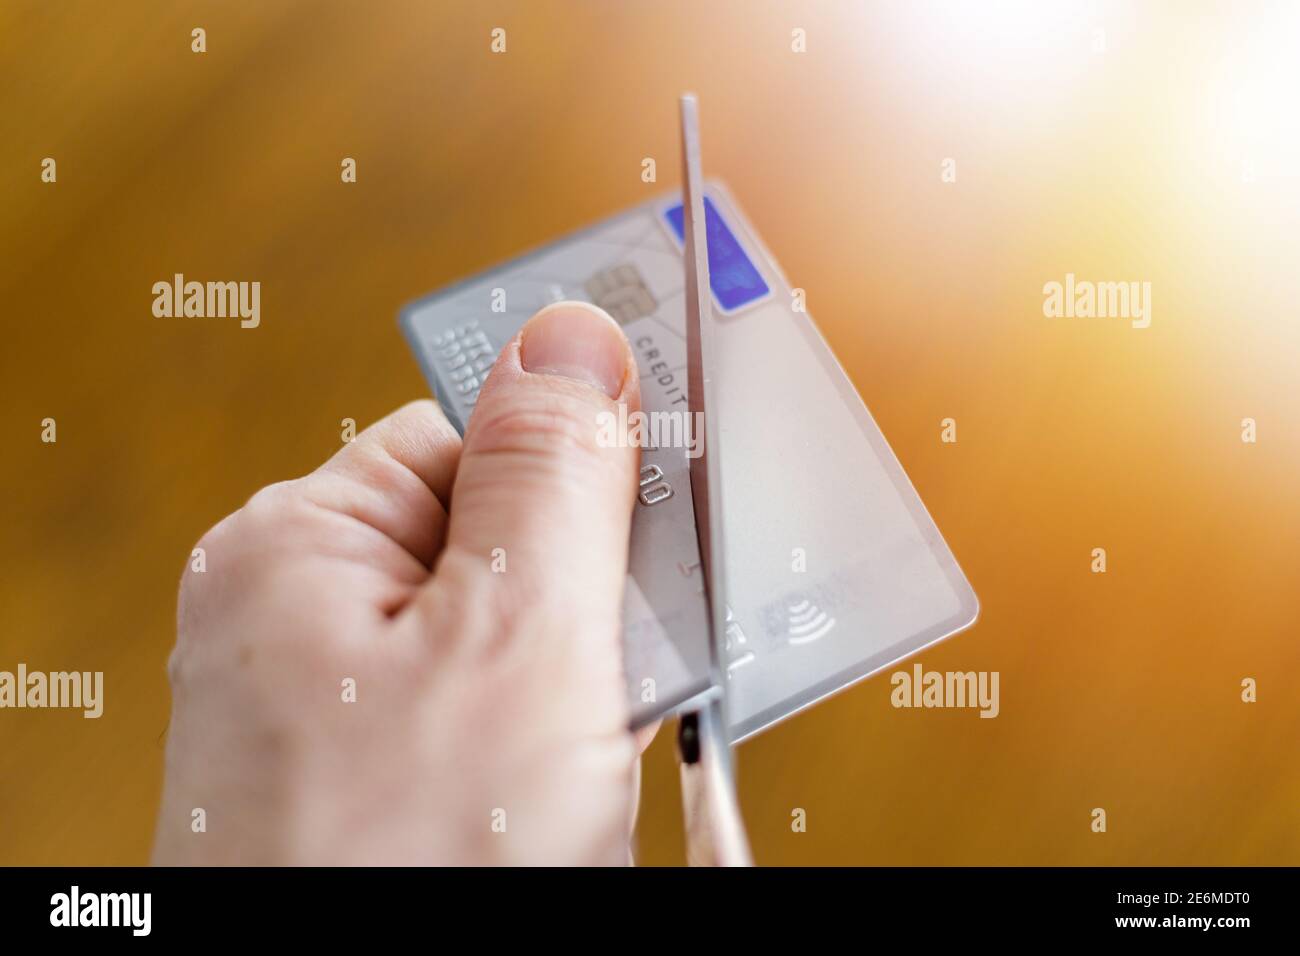 Irreversible destruction of a deactivated payment card by cutting with scissors Stock Photo